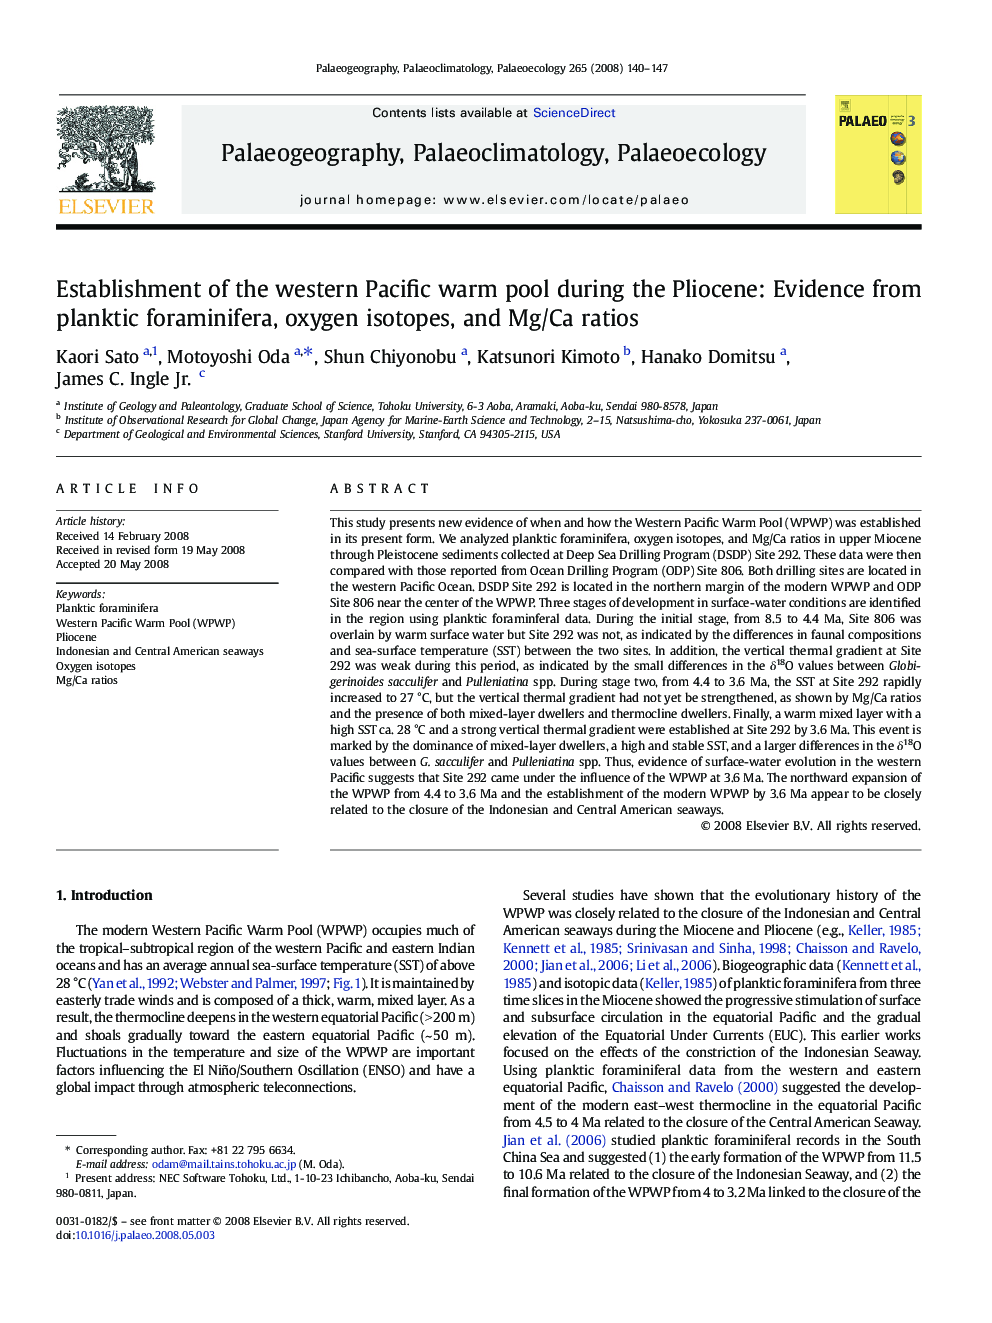 Establishment of the western Pacific warm pool during the Pliocene: Evidence from planktic foraminifera, oxygen isotopes, and Mg/Ca ratios